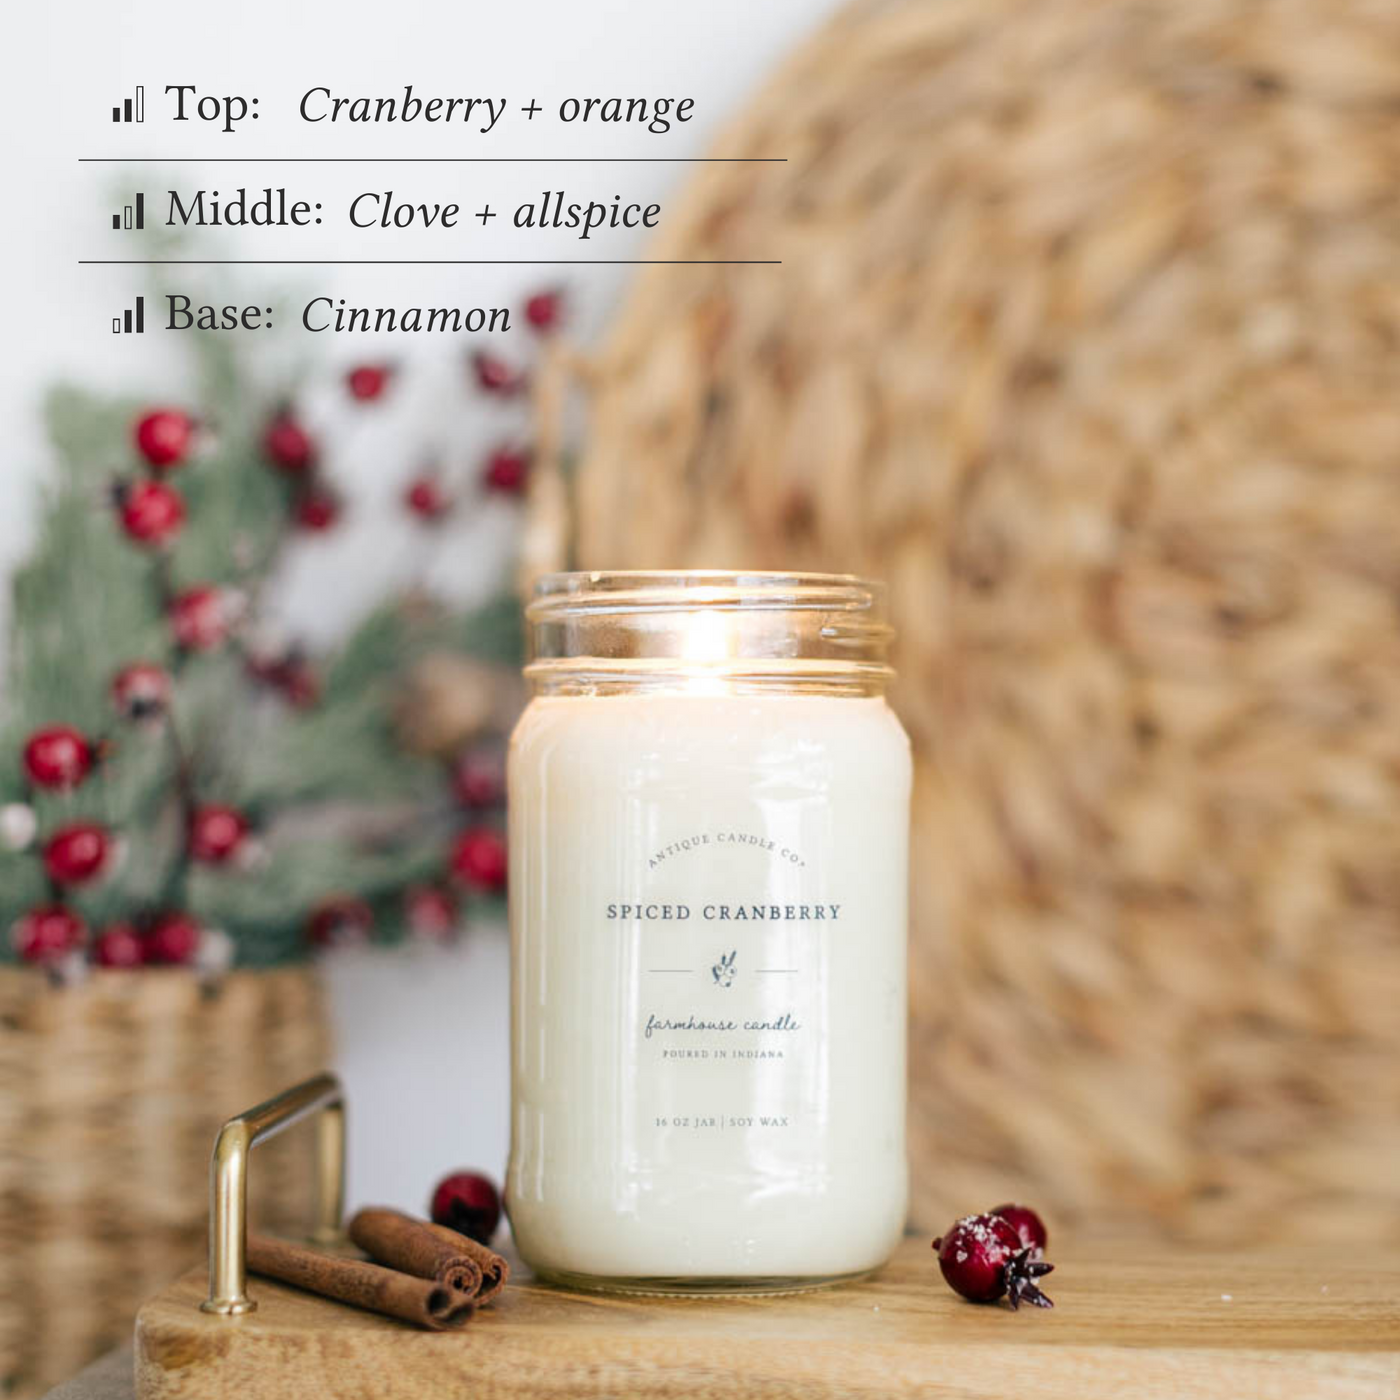 Spiced Cranberry Bundle of Three